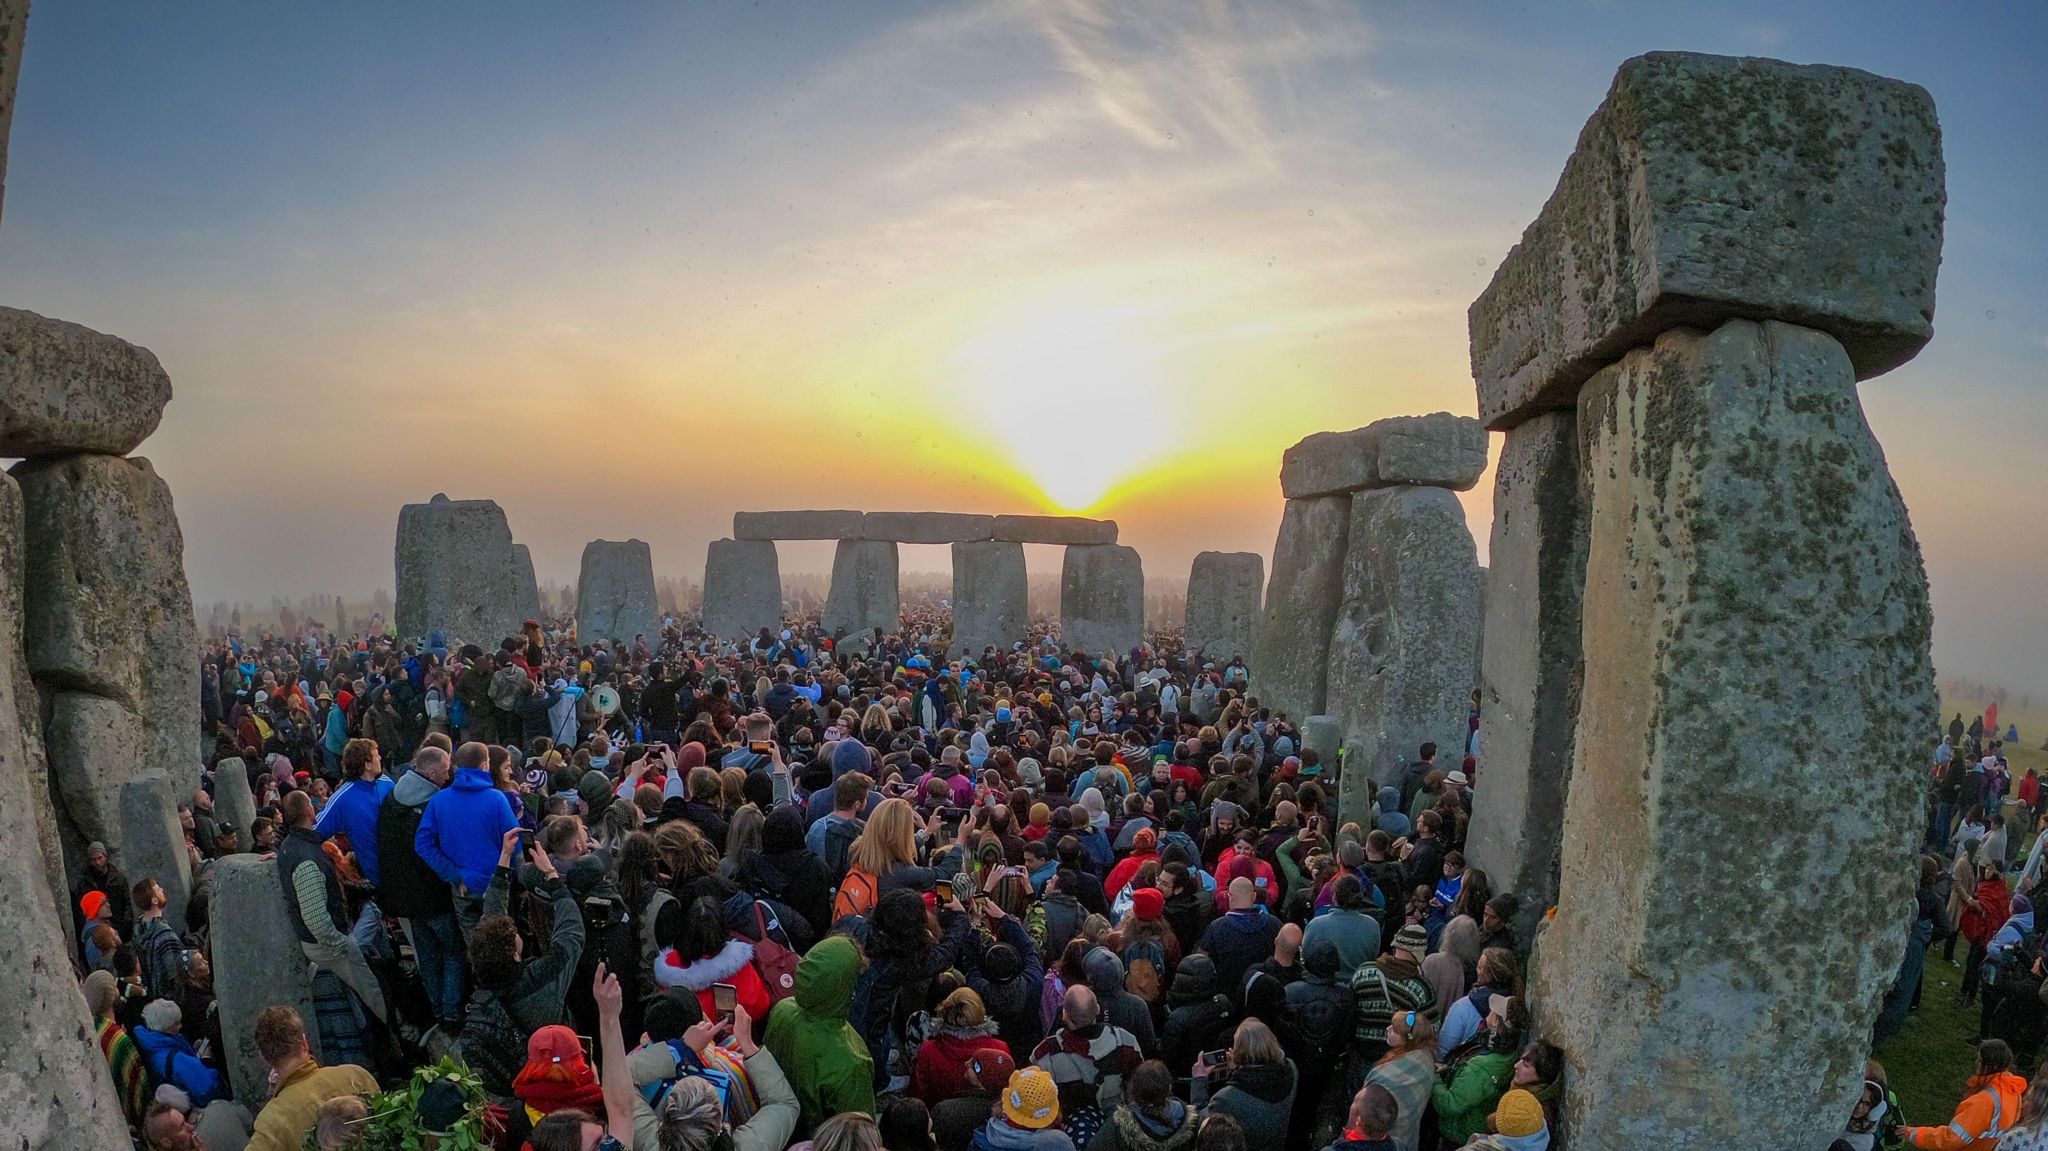 Crowds at Stonehenge as the sun sets